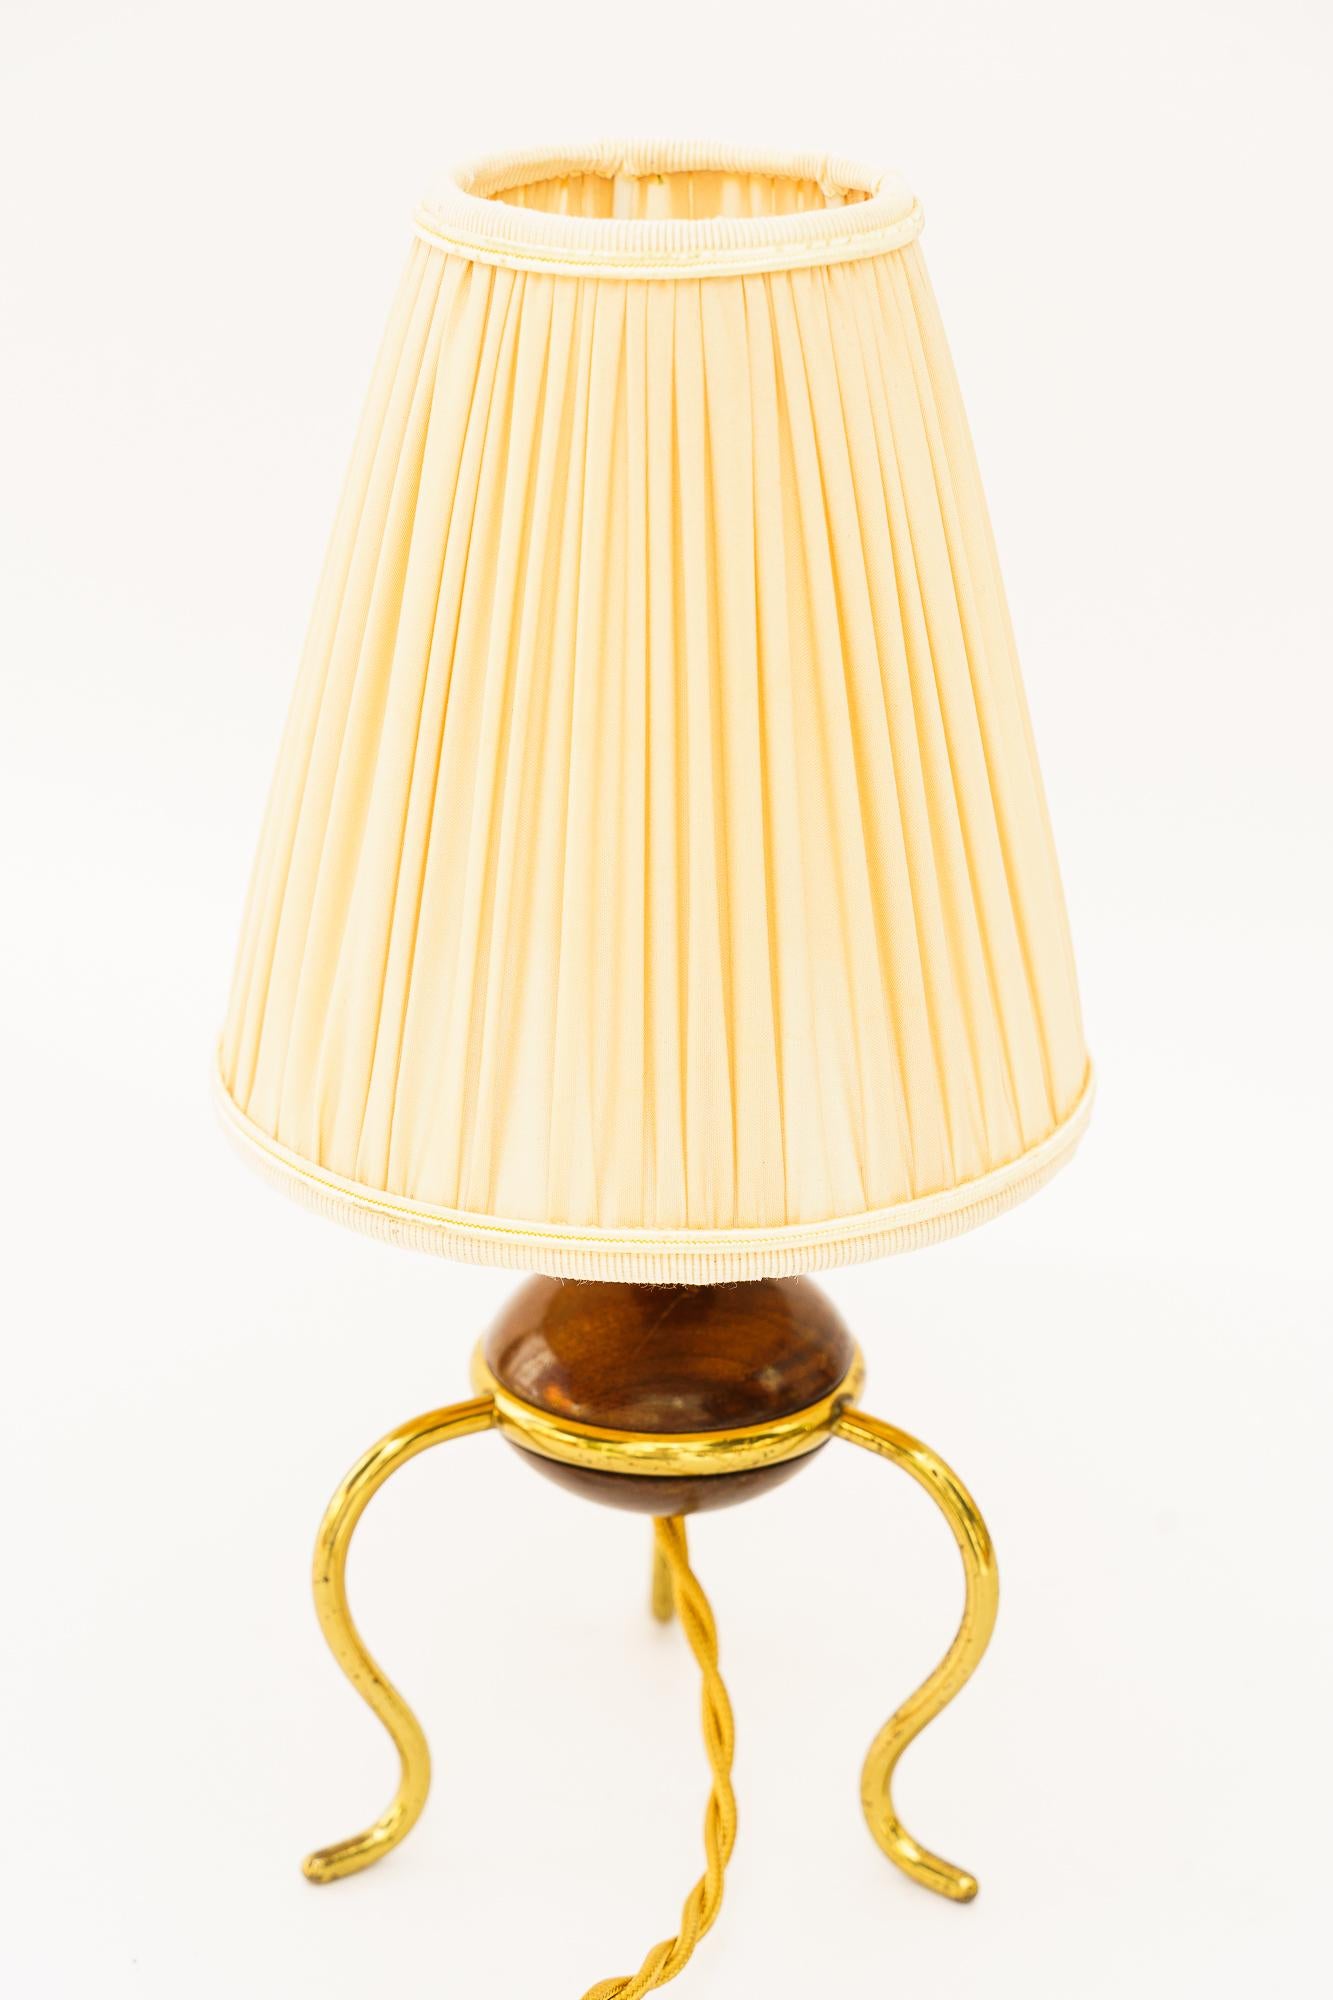 Rupert nikoll table lamp with fabric shade vienna around 1960s
Original condition
The fabric shade is replaced ( new )